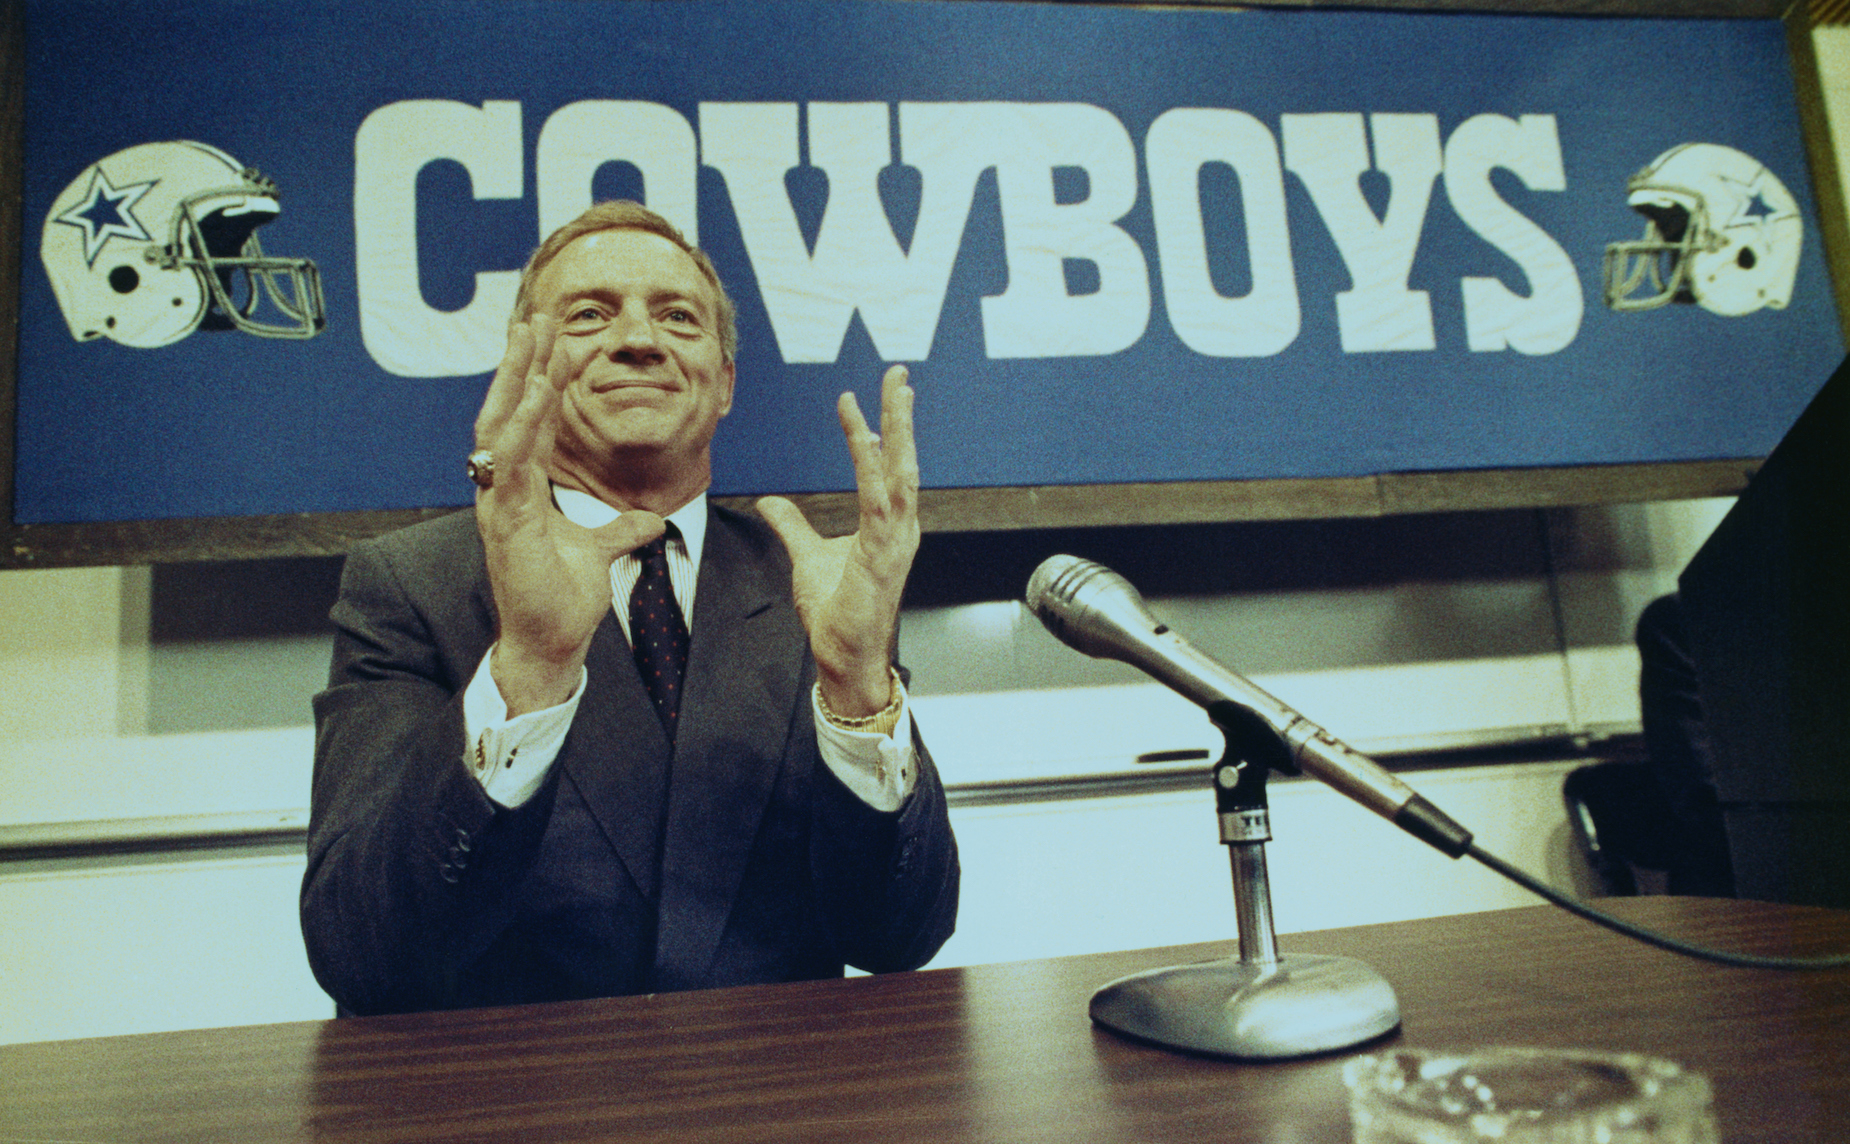 Jerry Jones gave Herschel Walker "houses and cars and all sorts of junk" so he'd accept a trade to the Minnesota Vikings.